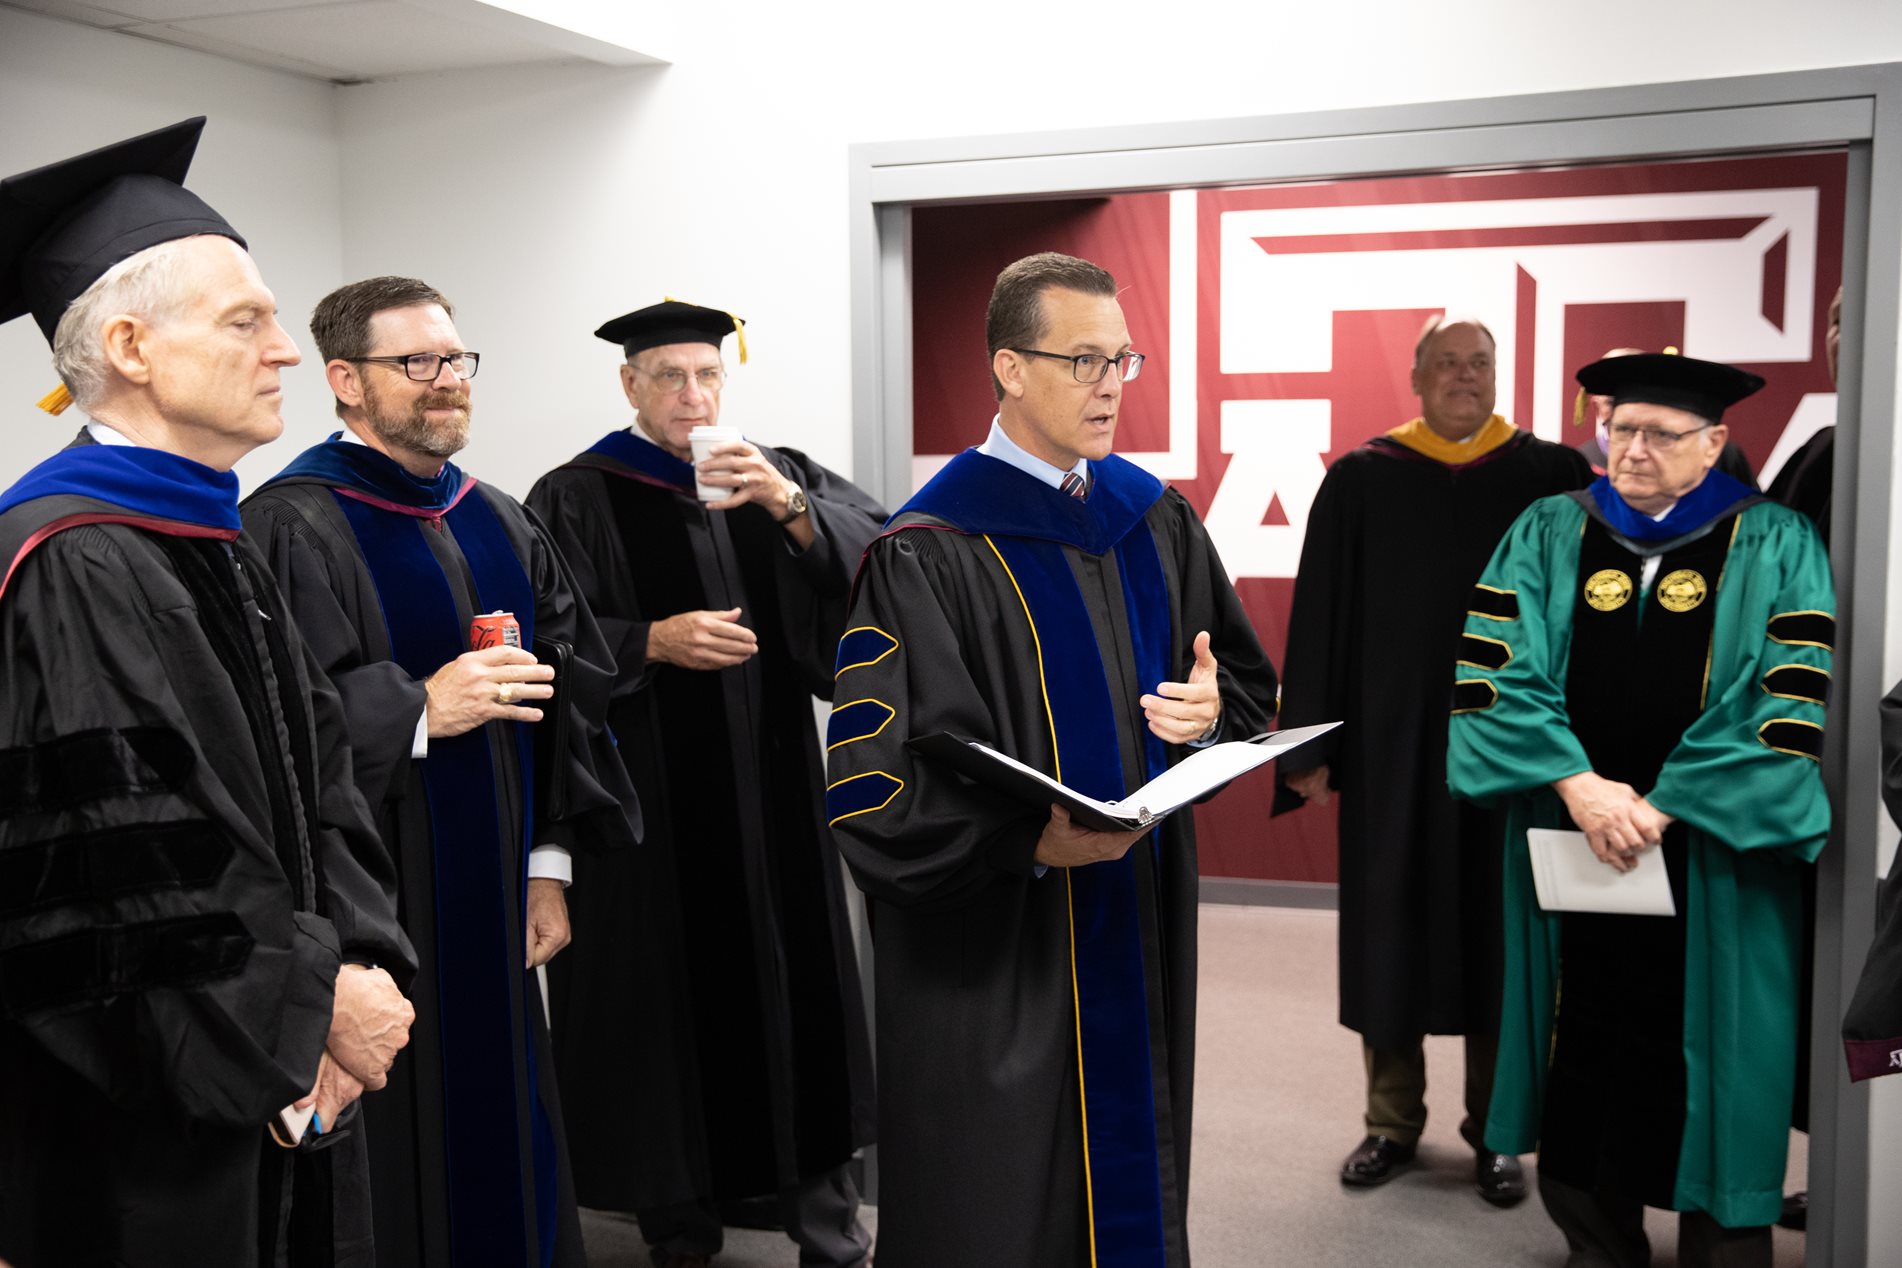 Group of male faculty and staff before the ceremony in regalia